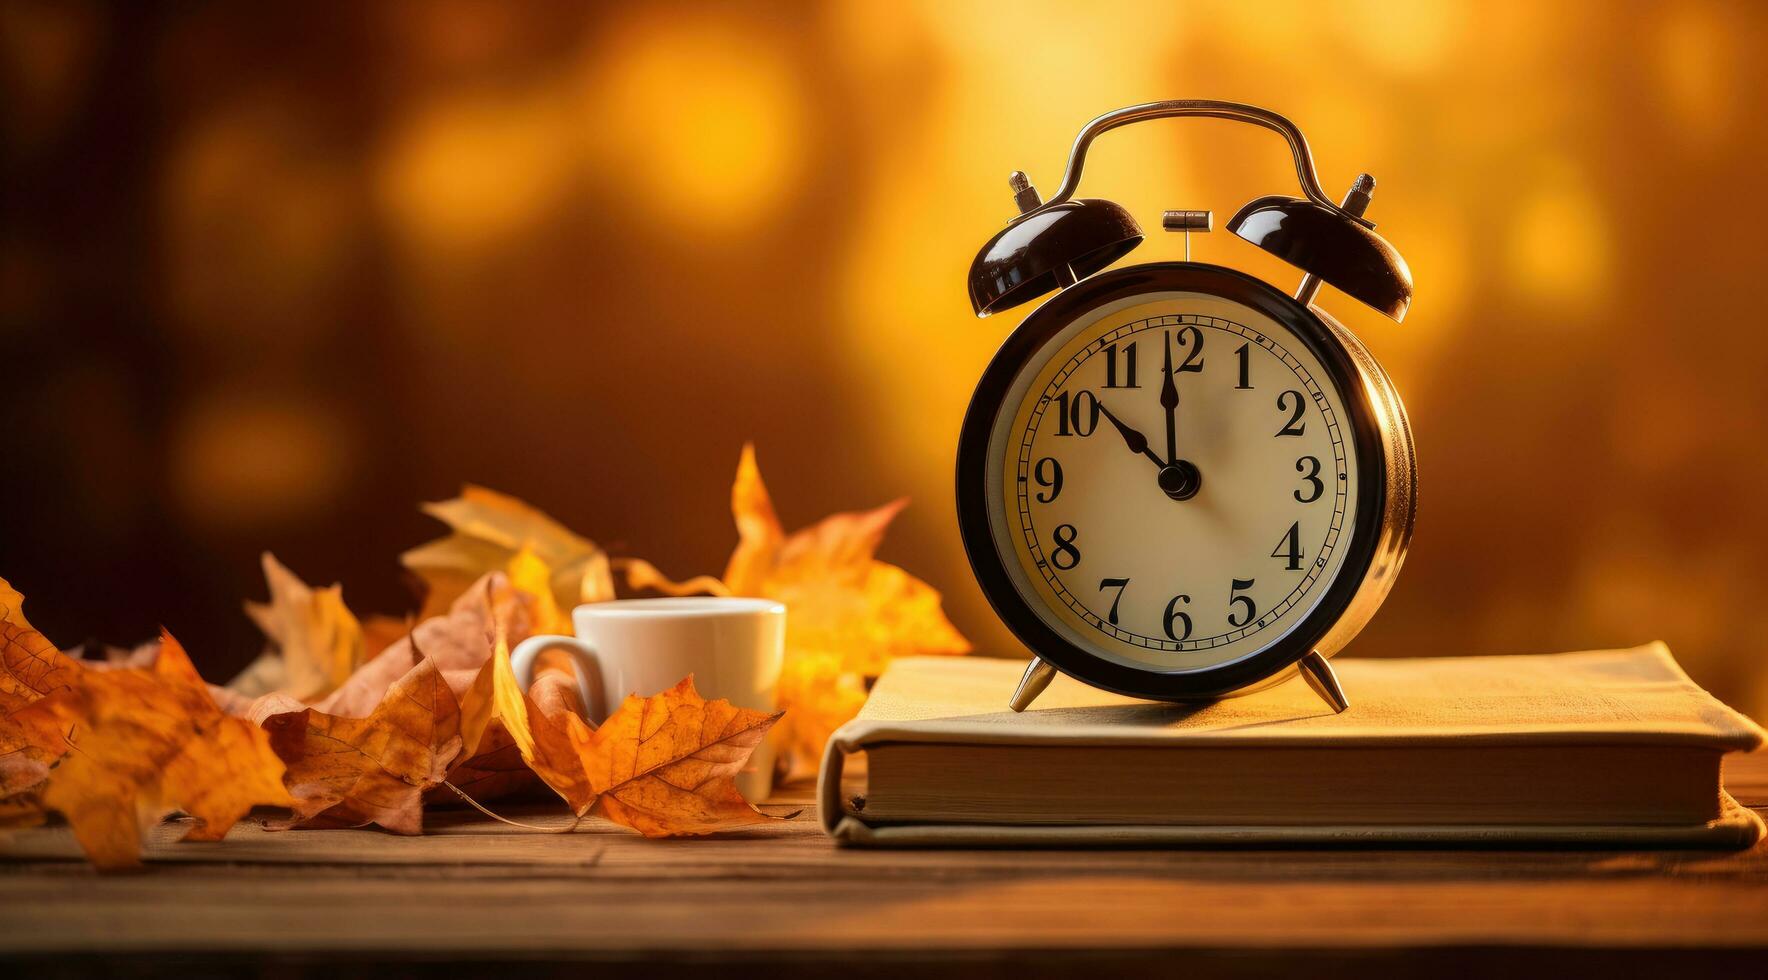 AI generated a book, alarm clock, and a fall leaf present on a table photo